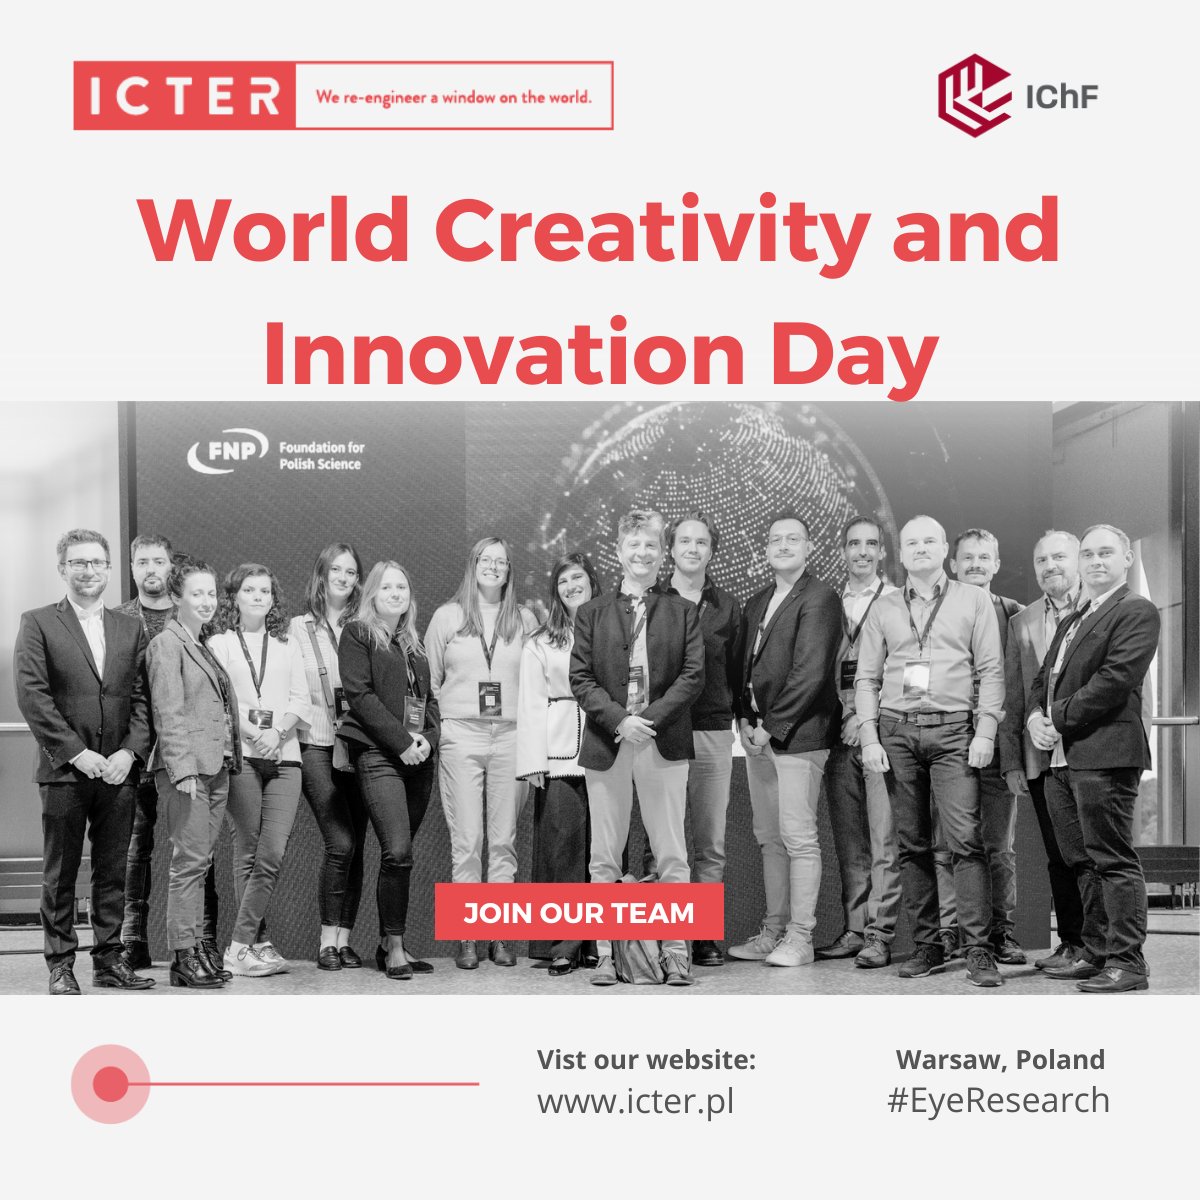 Today we celebrate World Creativity and Innovation Day, initiated by the United Nations in 2002. Our research to advance the diagnosis and treatment of eye diseases is driven by creativity.
📢 Join our innovative team: icter.pl/careers/. 
#Hiring #JobOffer #EyeResearch